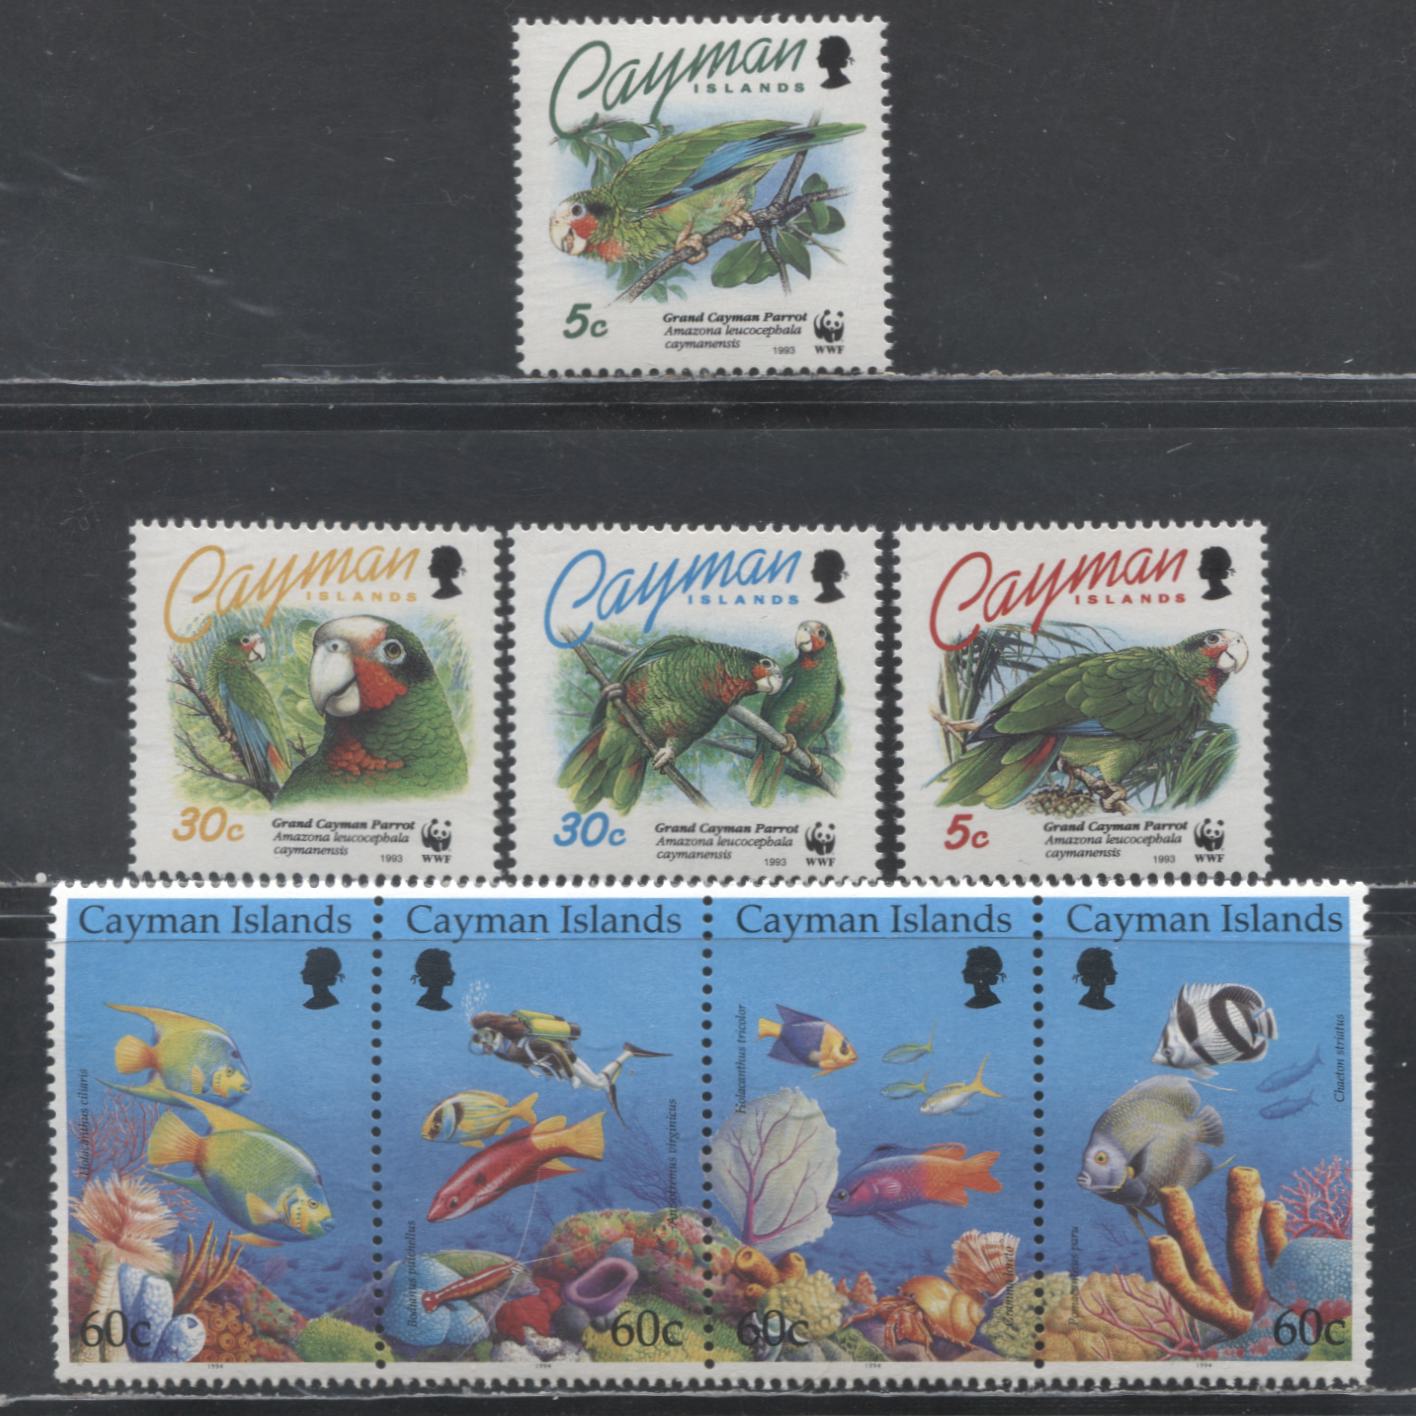 Lot 151 Cayman Islands SC#668/676d 1993-1994 Grand Canyon - Reef Life Issues, 5 VFNH Singles & Strip Of 4, Click on Listing to See ALL Pictures, 2017 Scott Cat. $22